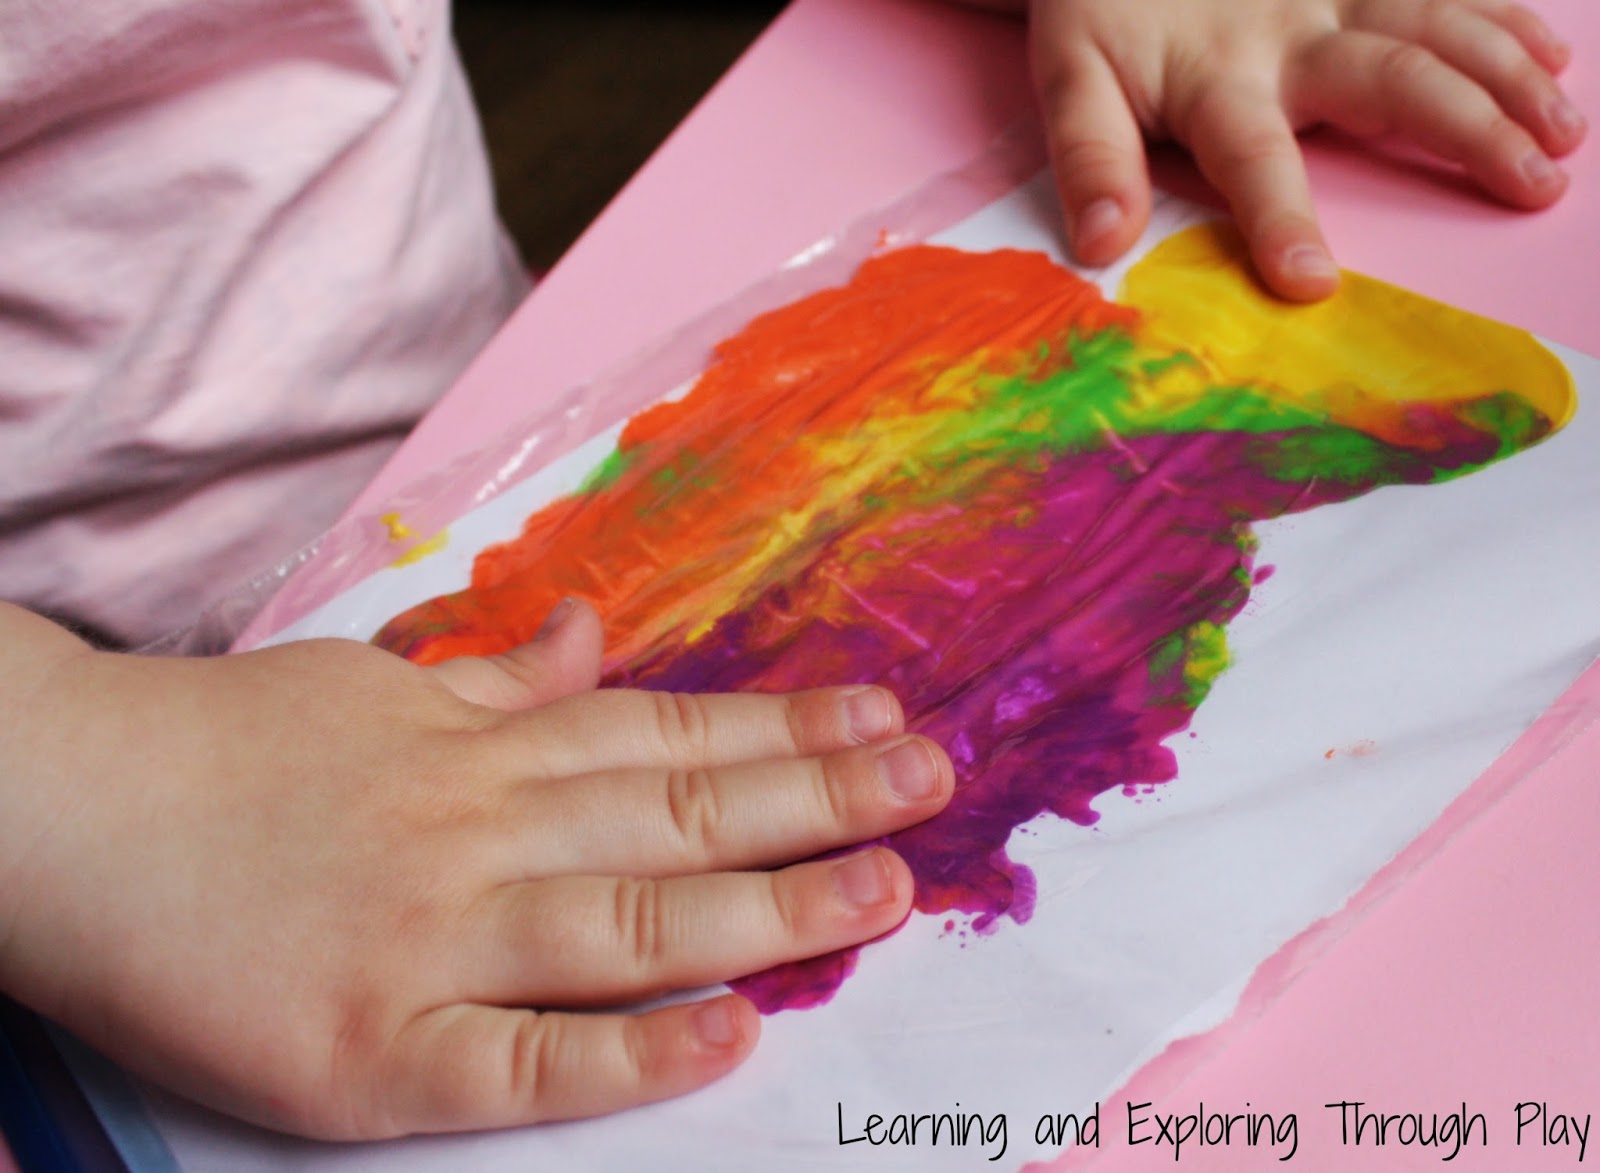 Mess Free Painting for Toddlers  Mess free painting, Preschool fun, Toddler